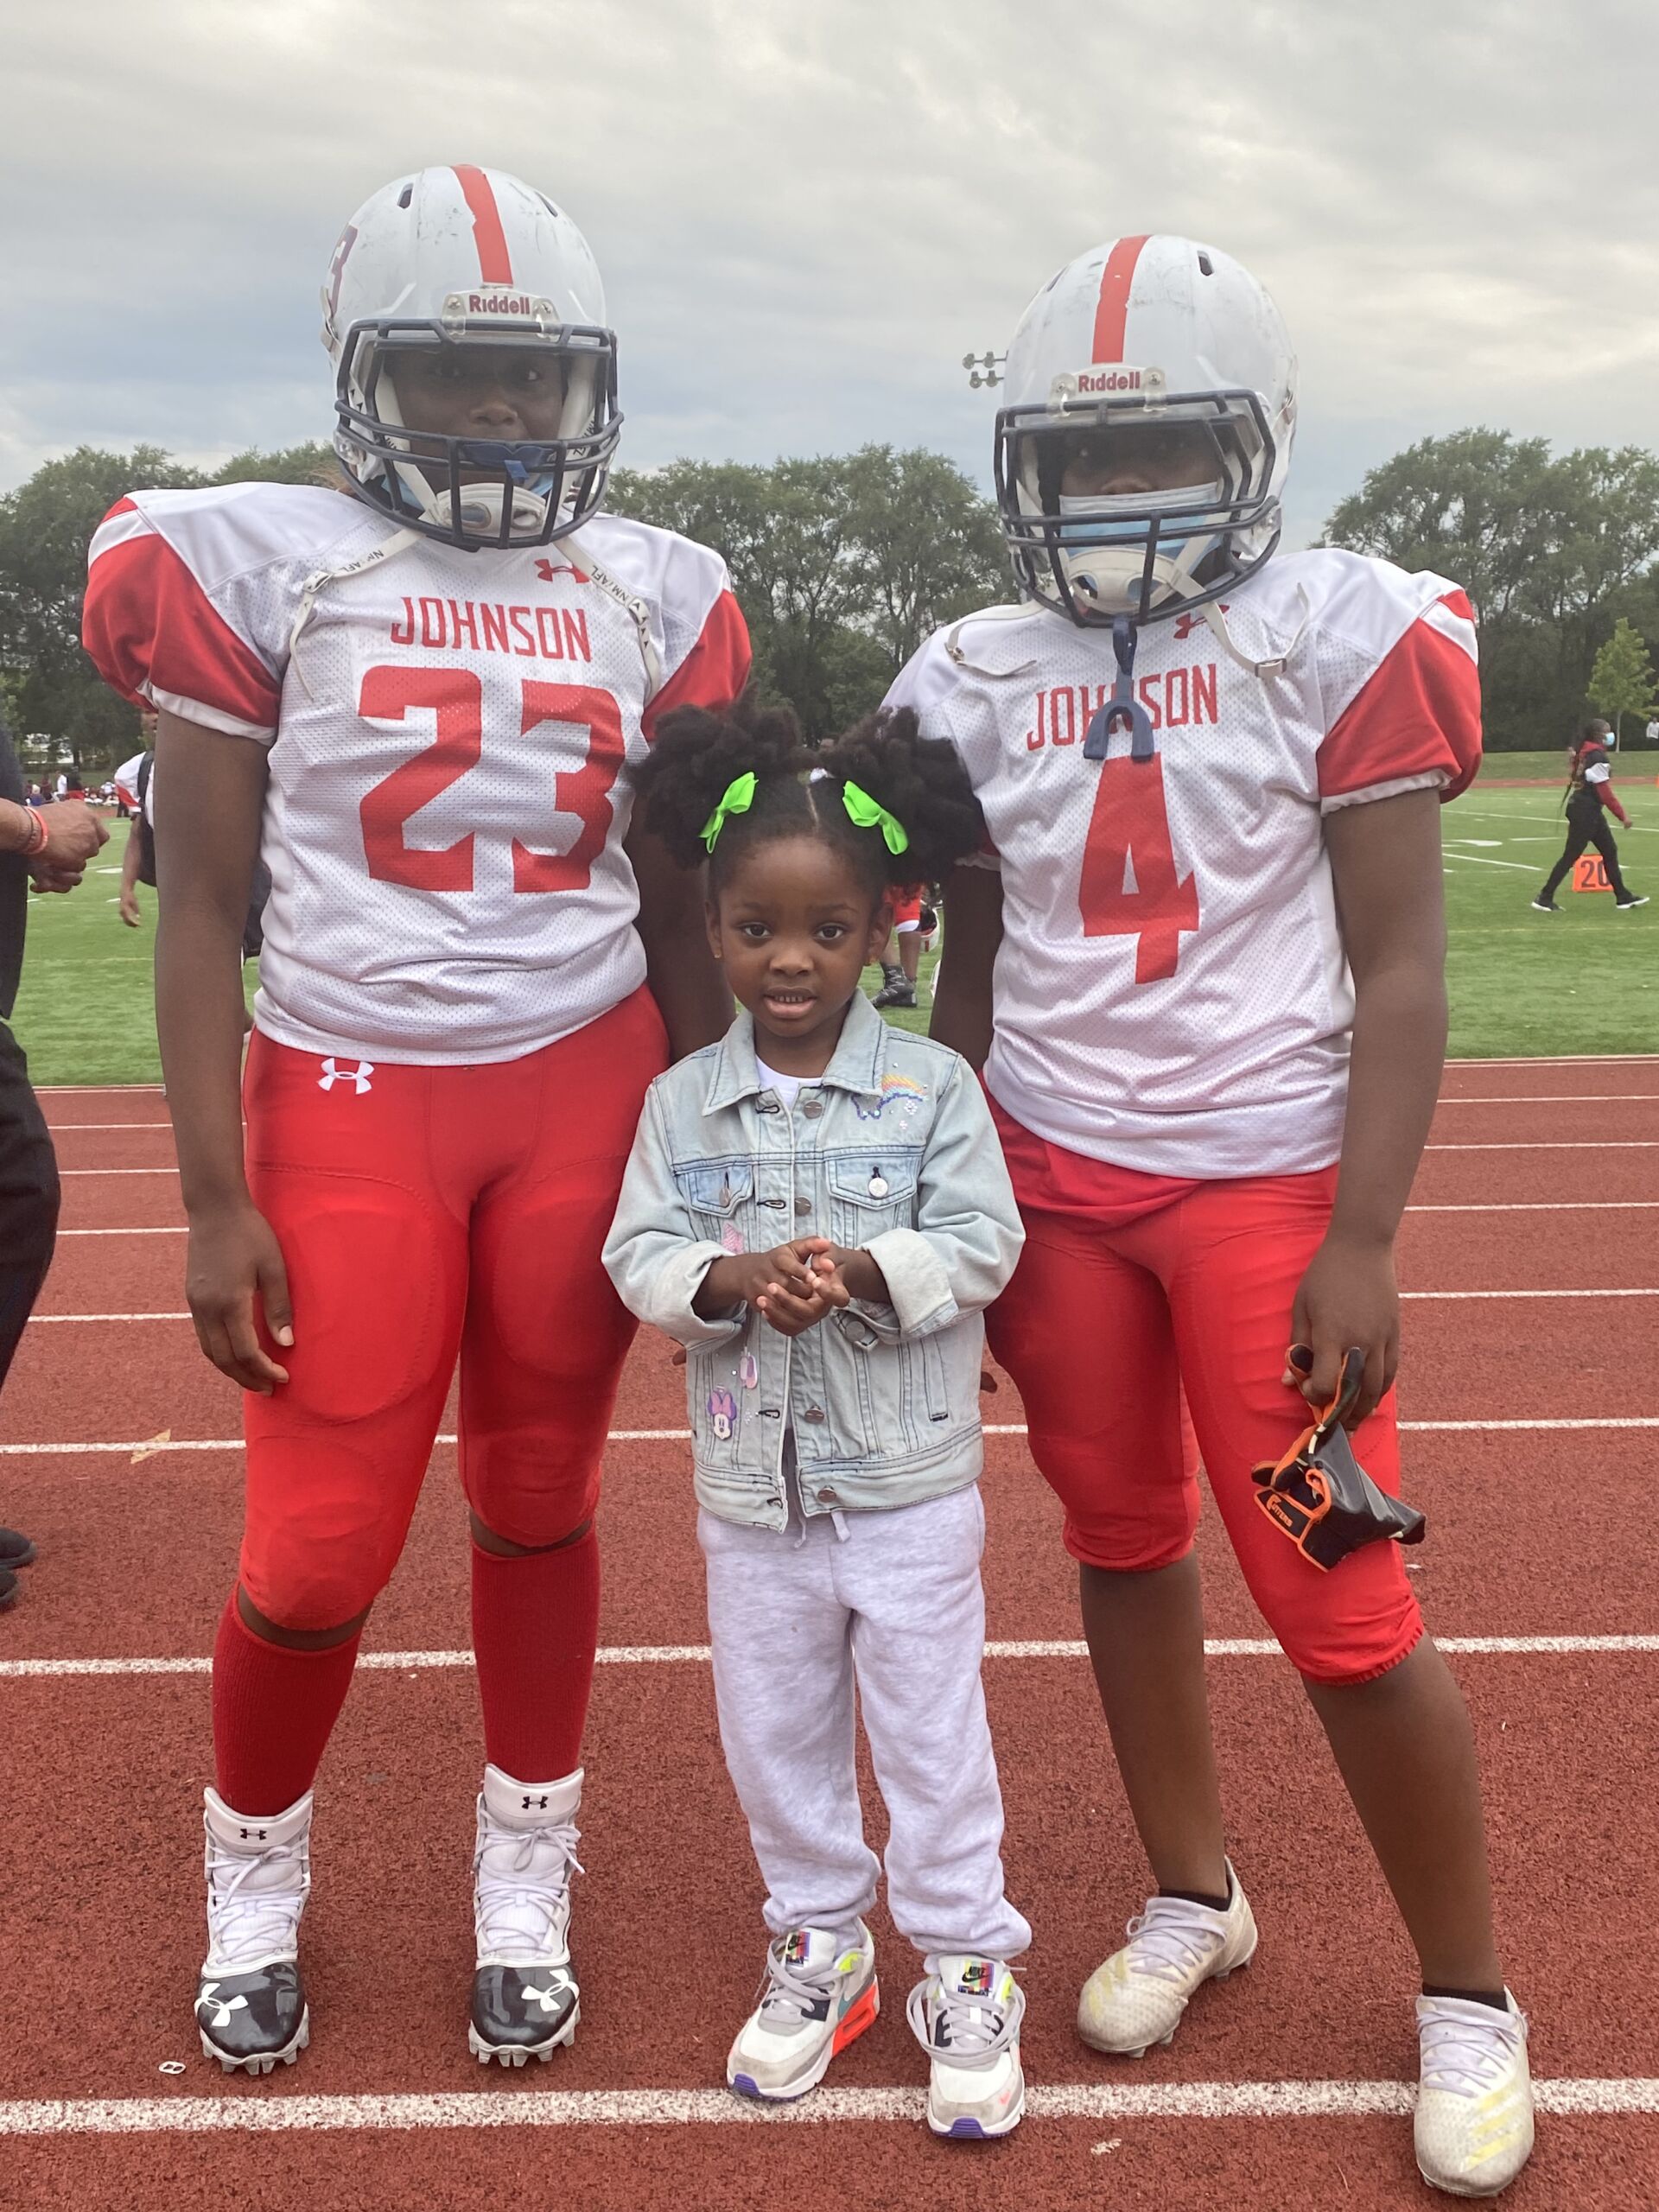 Image shows two female football players at Johnson College Prep, one of them Le'Andra H, standing with a young Black girl---Principal Jonas Cleaves' daughter. They are outside on the football field.